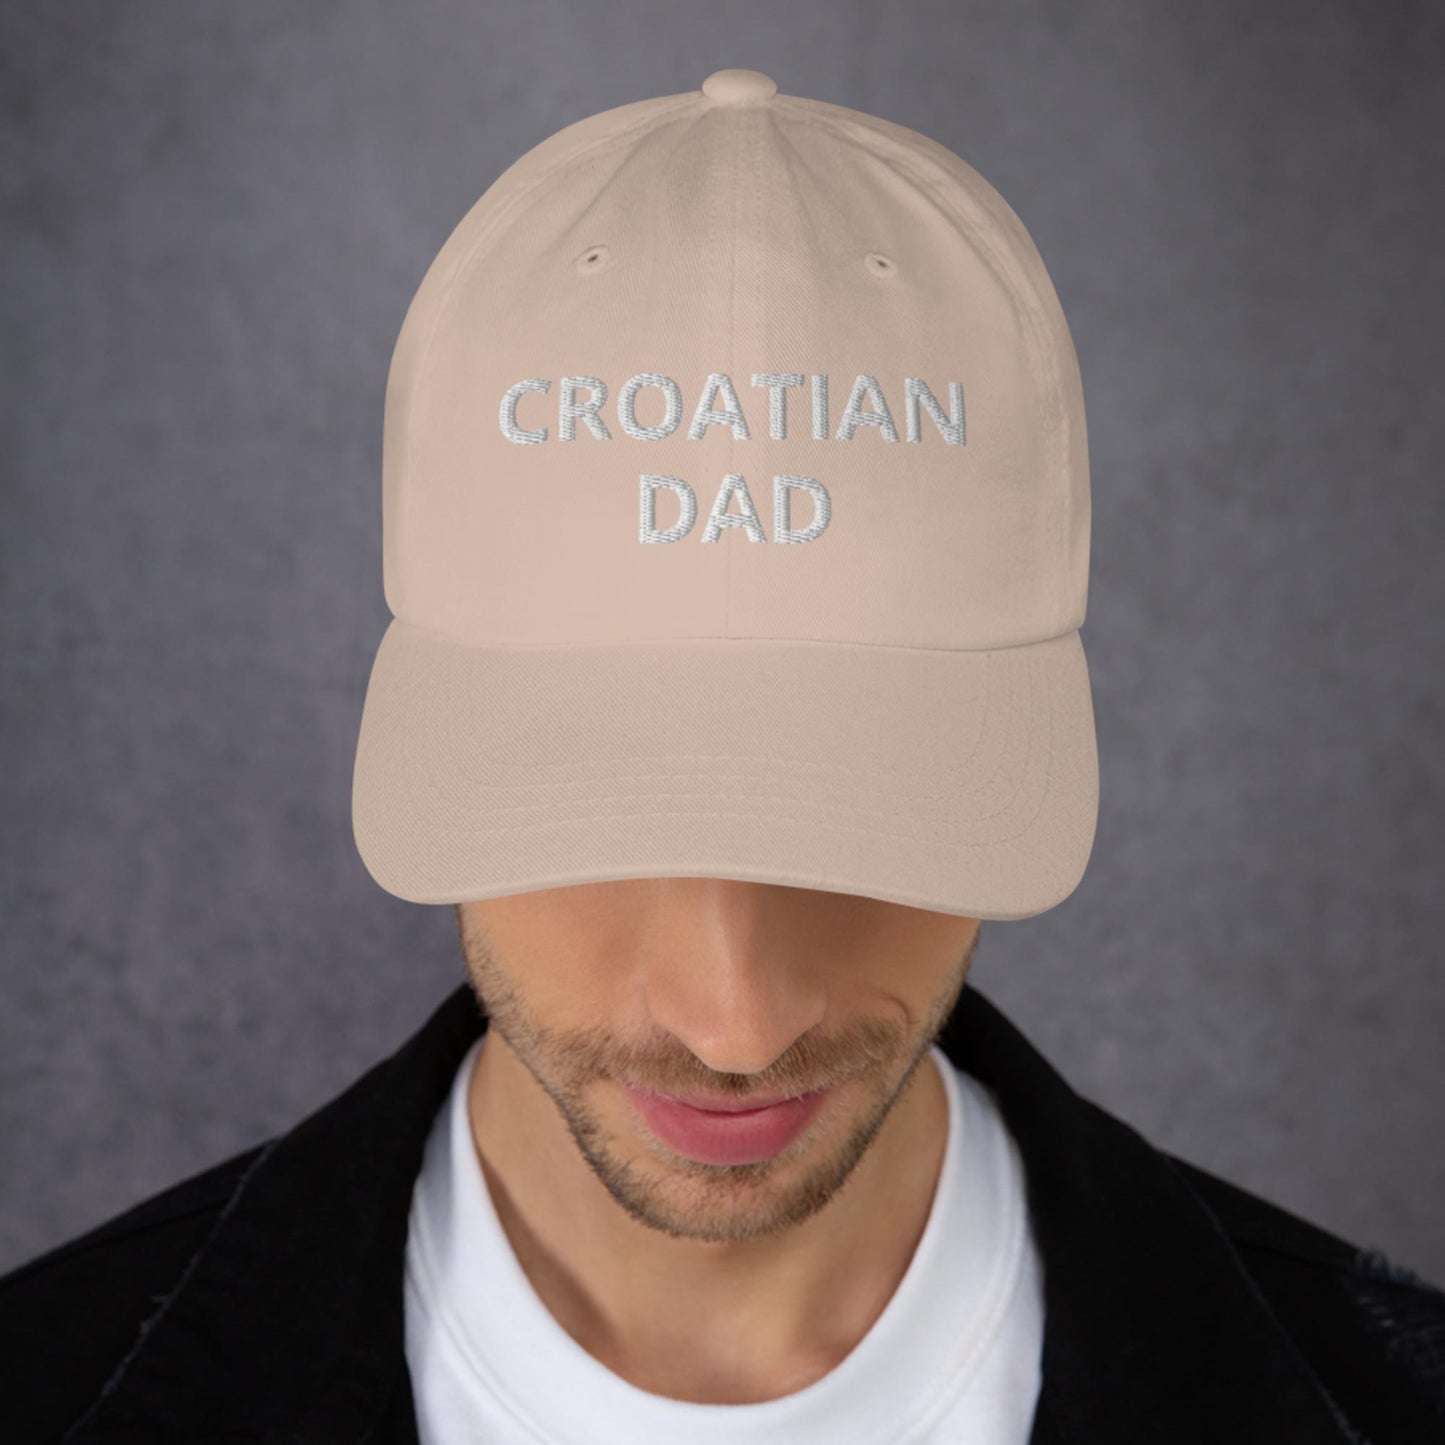 Croatian Dad Hat - Embrace Your Heritage with Style